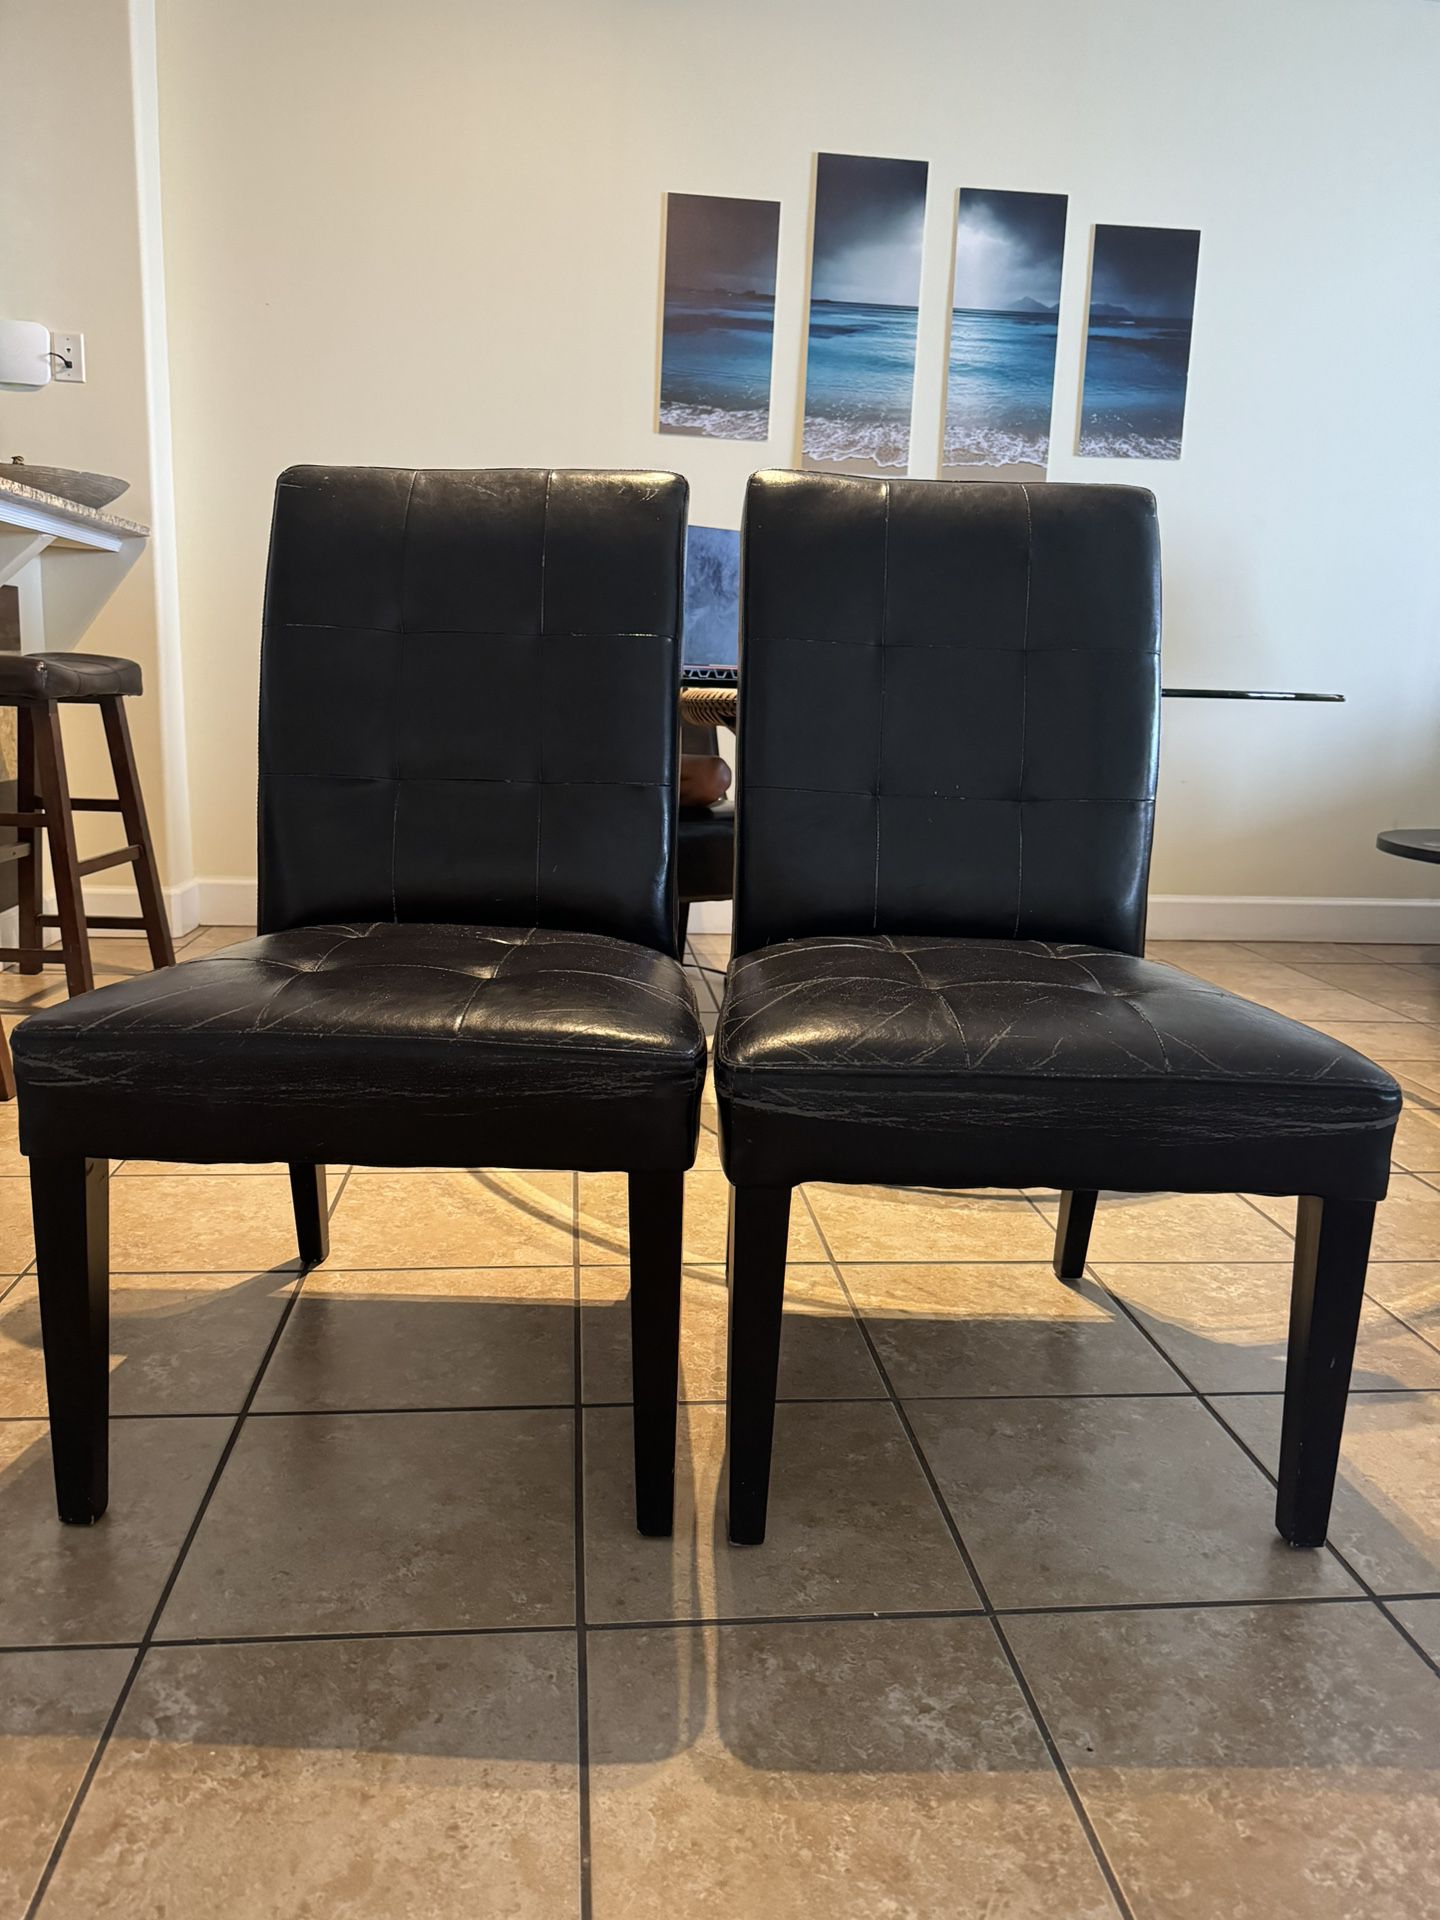 6 Brown Leathers Chairs 